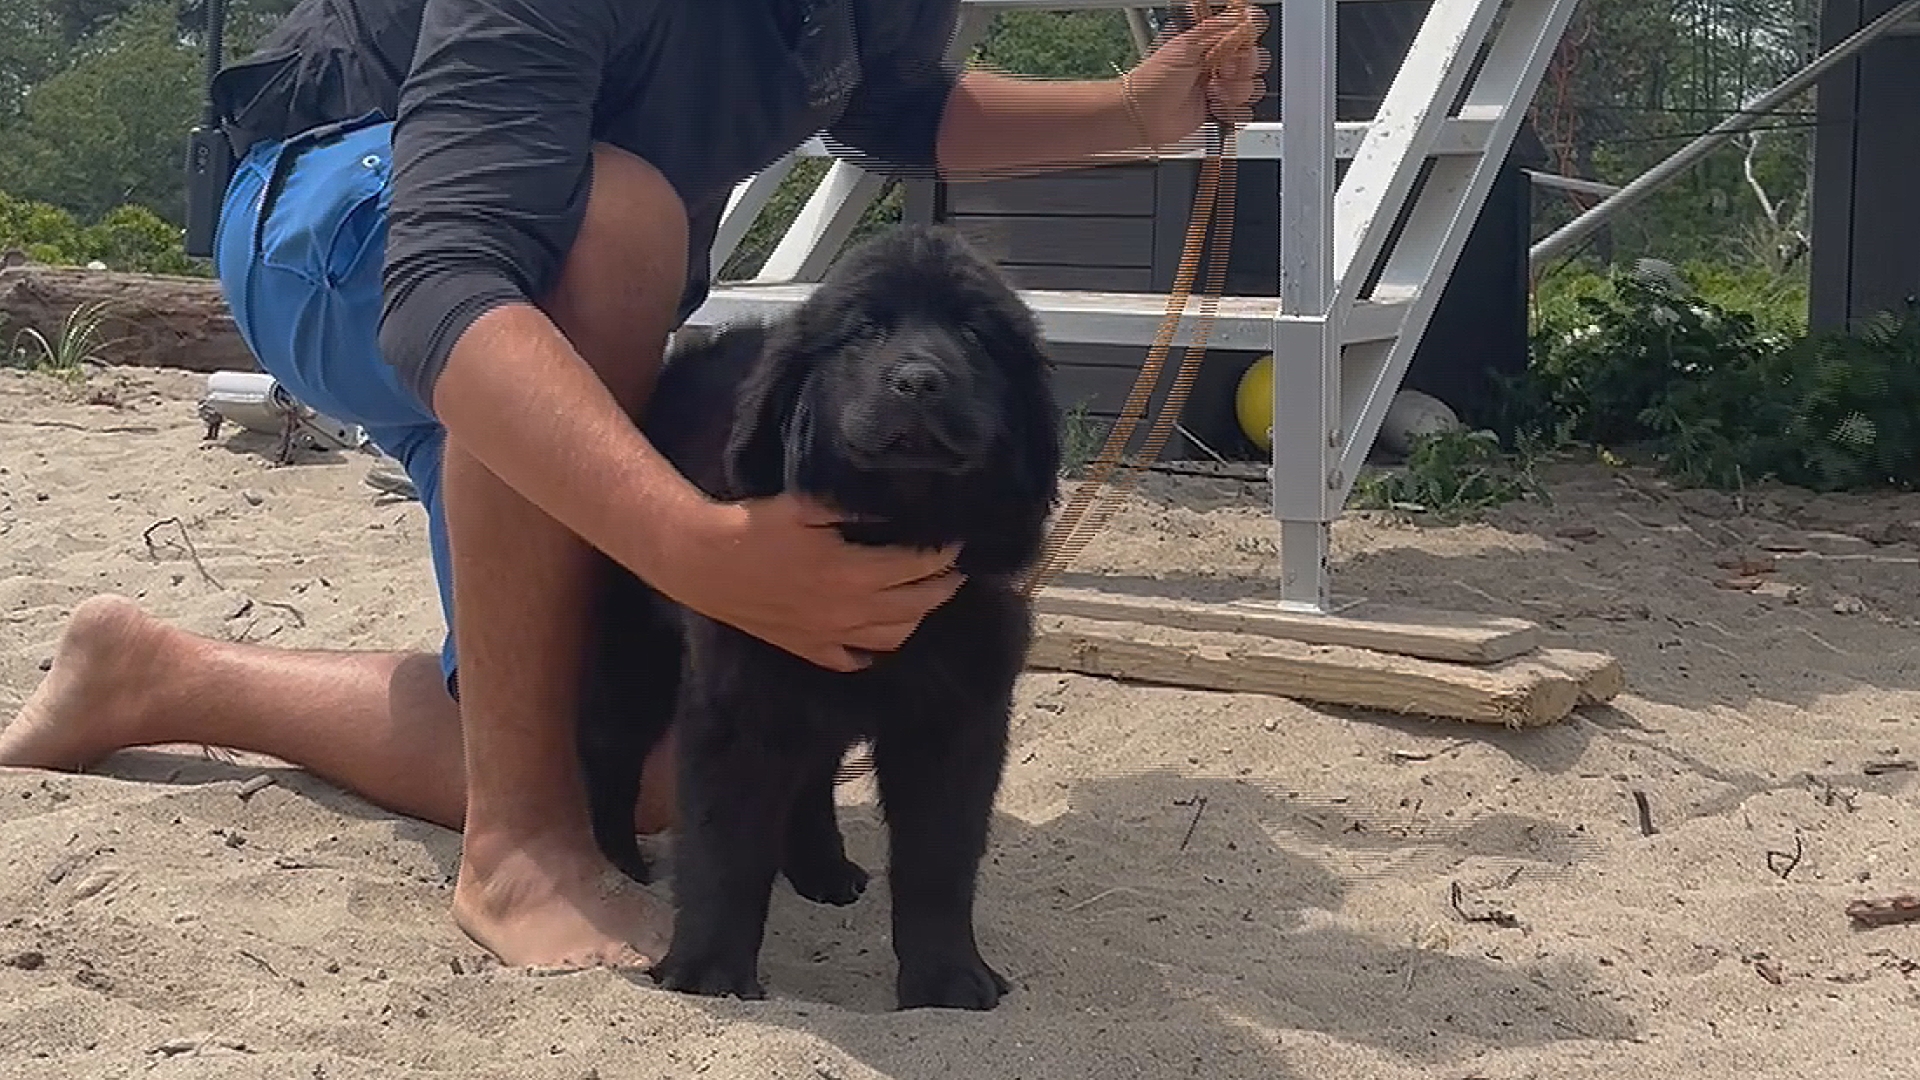 Two dogs have been manning the lifeguard post for a couple of years. The team is now adding 11-week-old Bell to the roster.